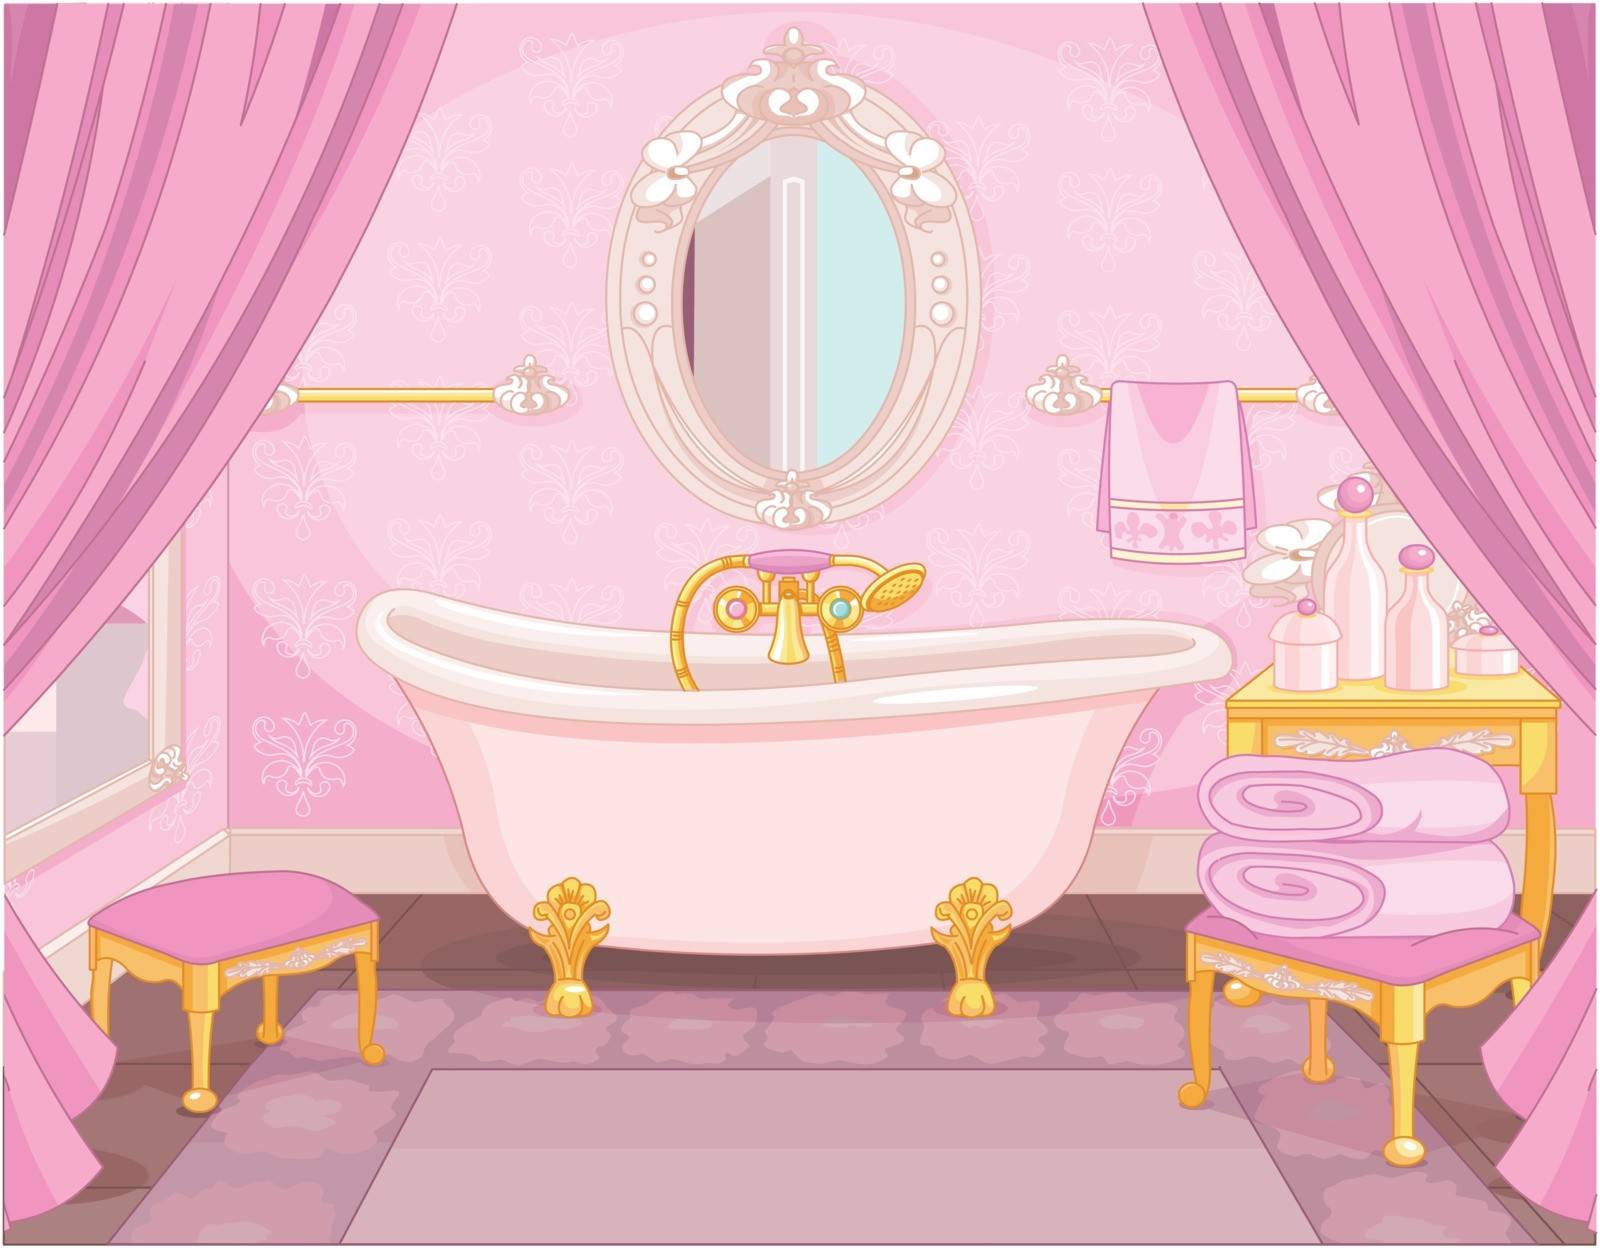 Bathroom in the castle of the princess